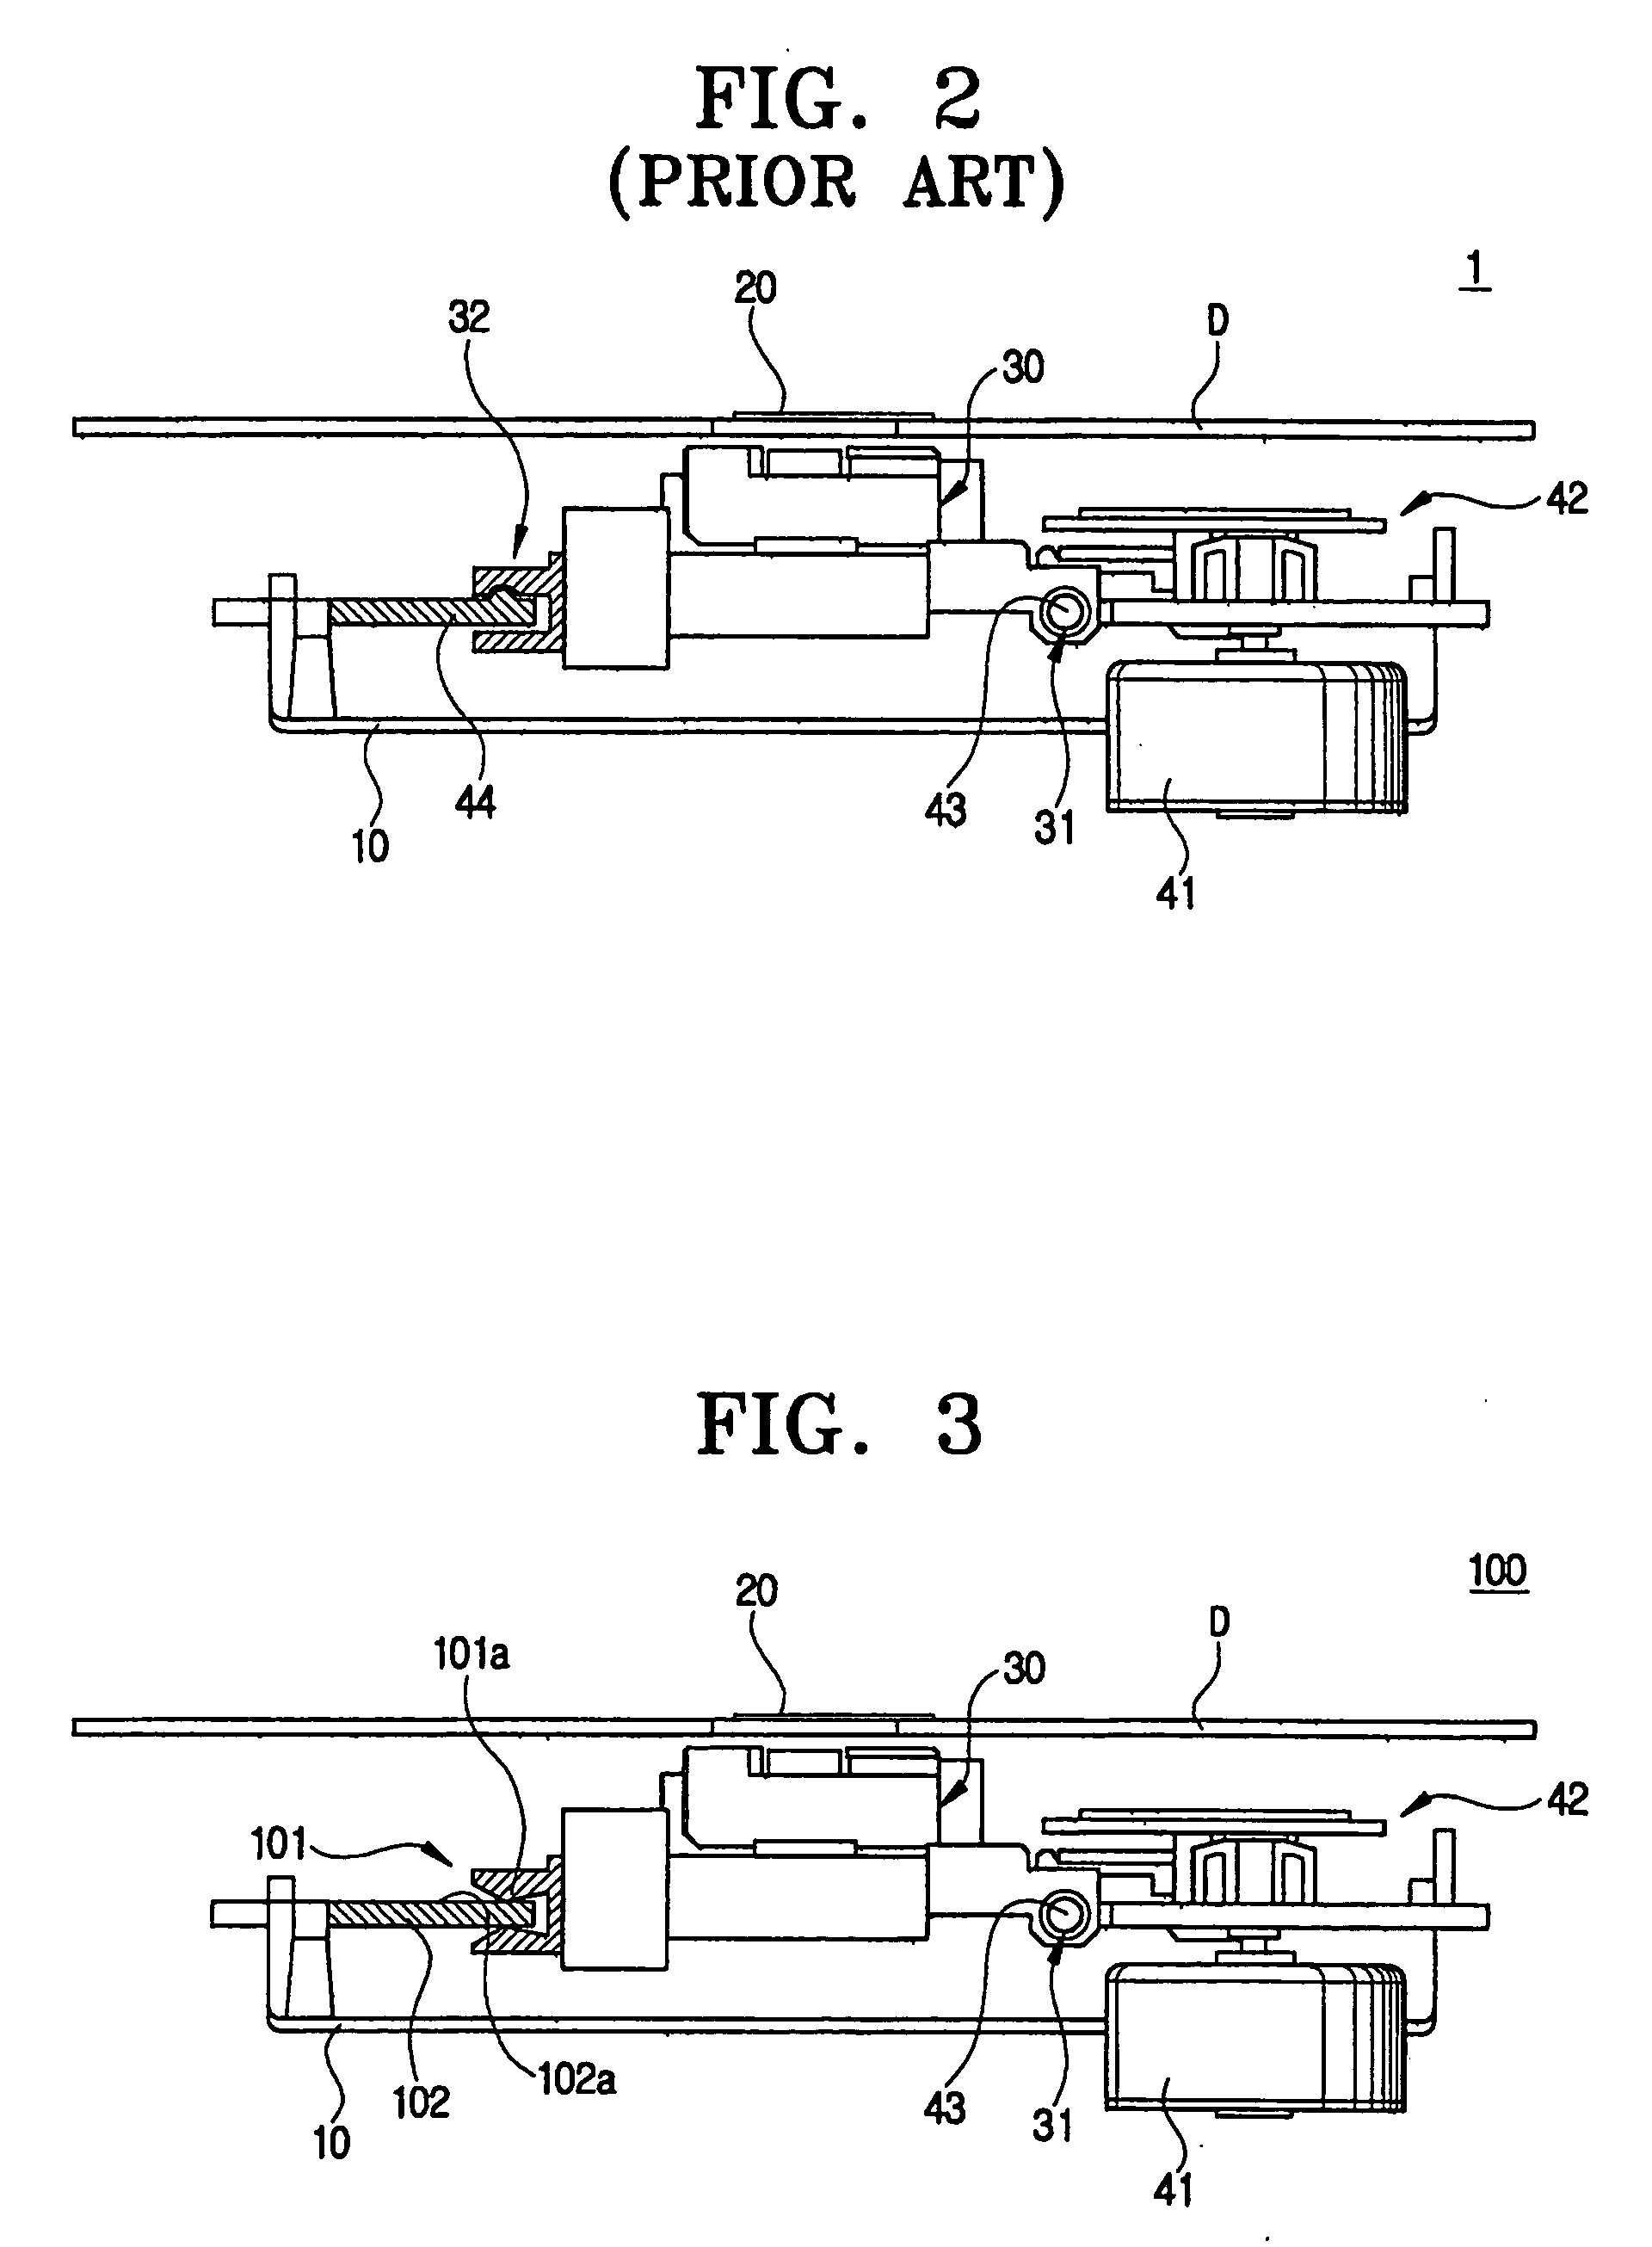 Optical pickup apparatus for optical disc drive